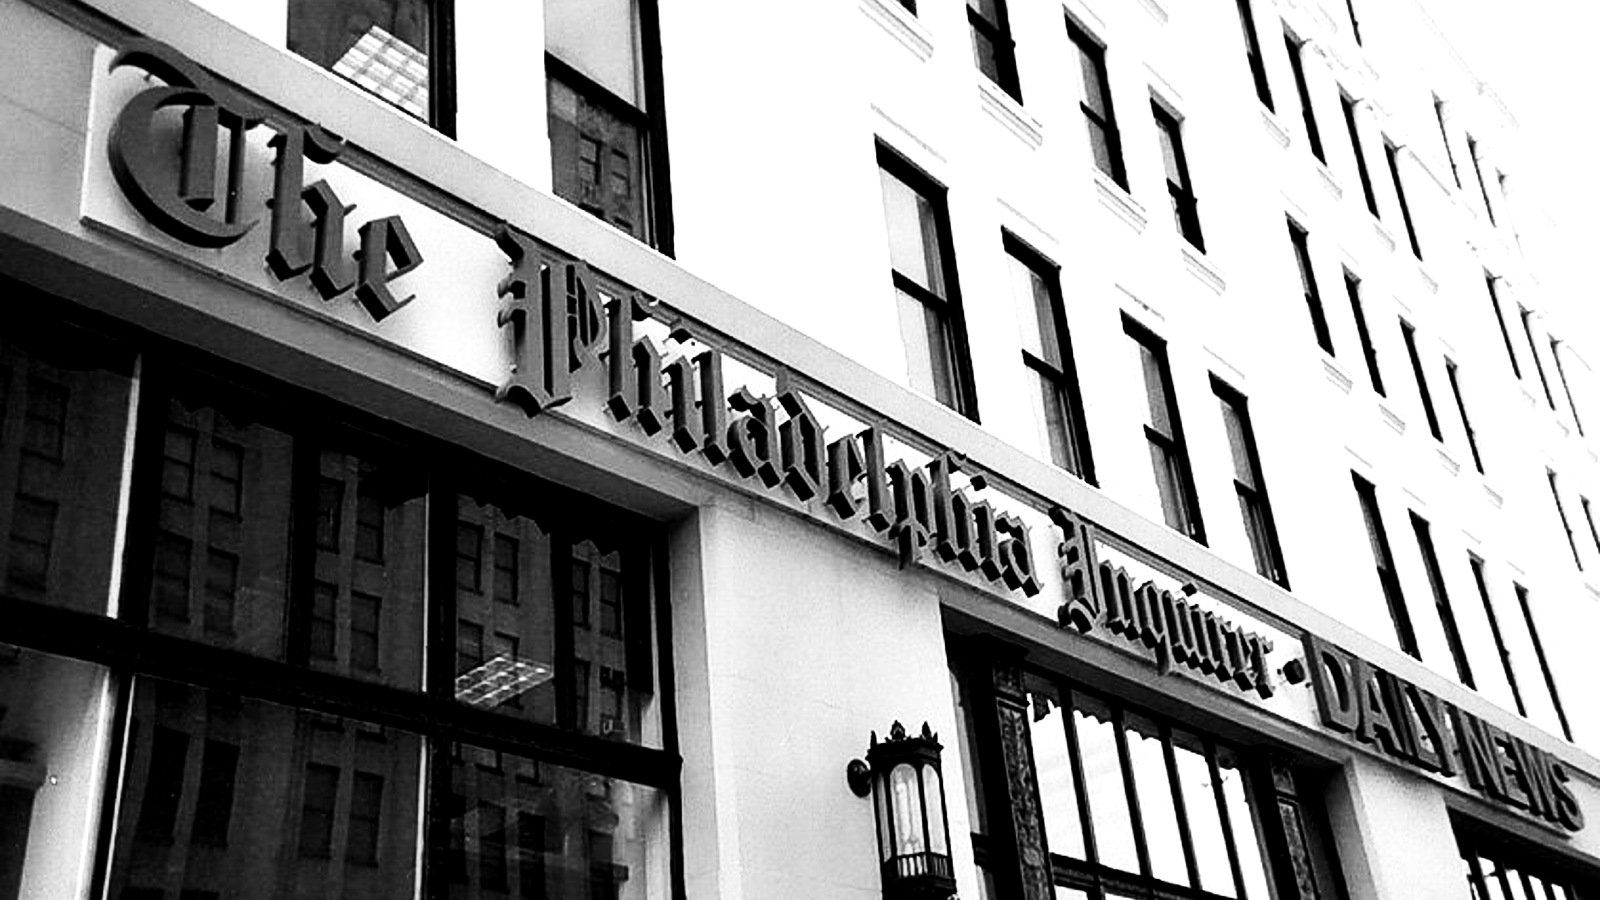 Philadelphia Inquirer operations disrupted after cyberattack – Source: www.bleepingcomputer.com